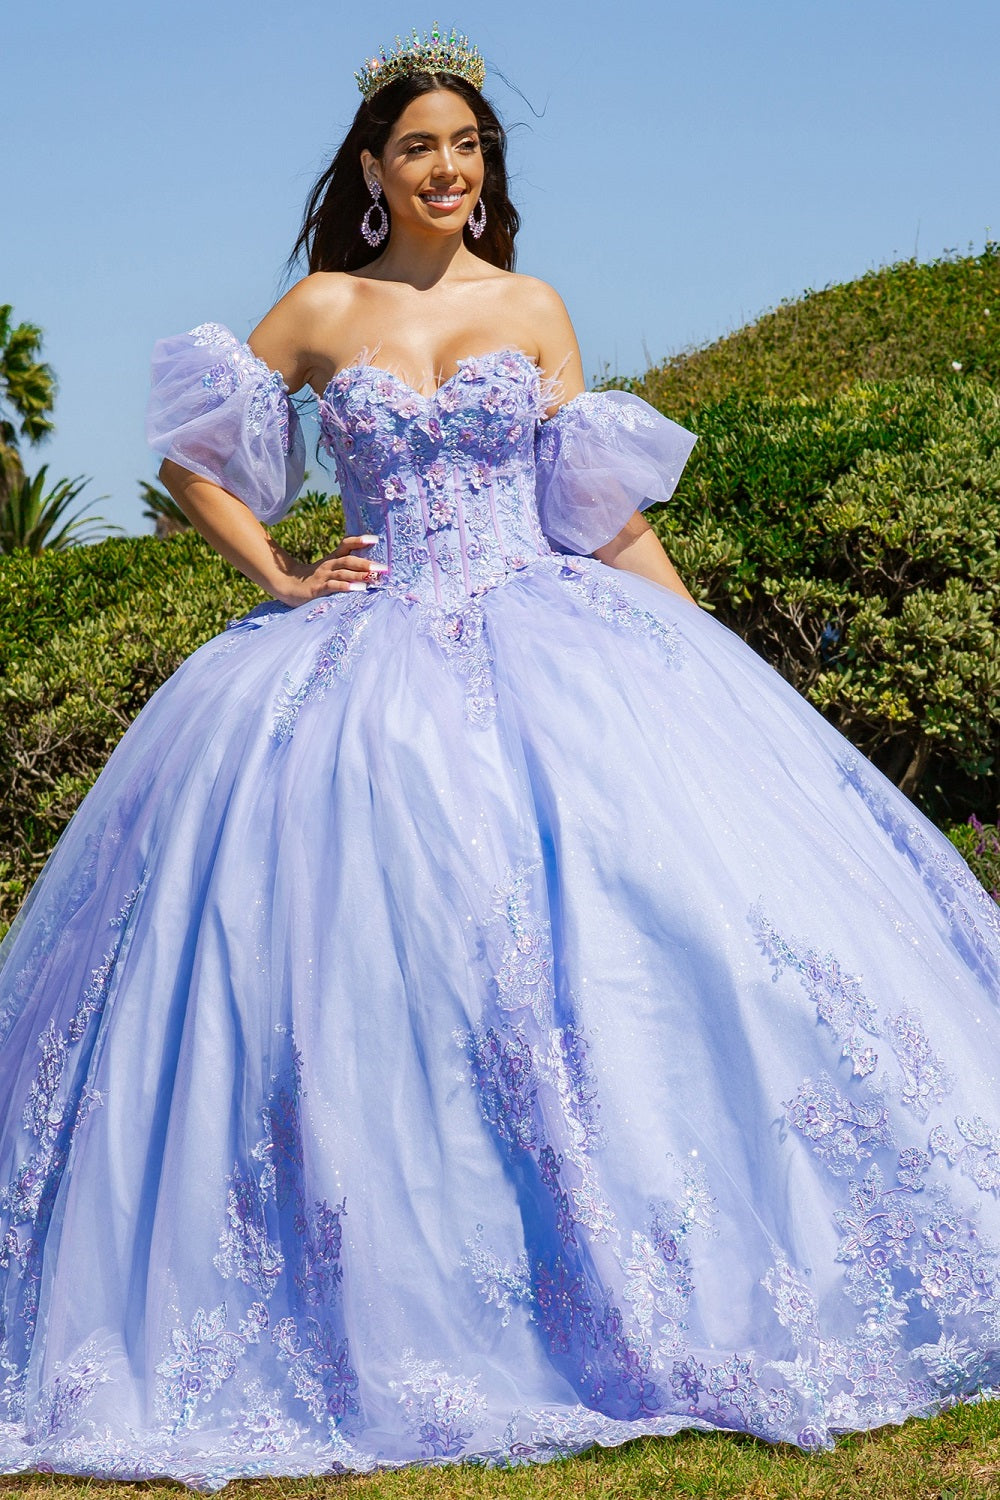 Strapless Puff Sleeve Ball Gown by Cinderella Couture 8115J